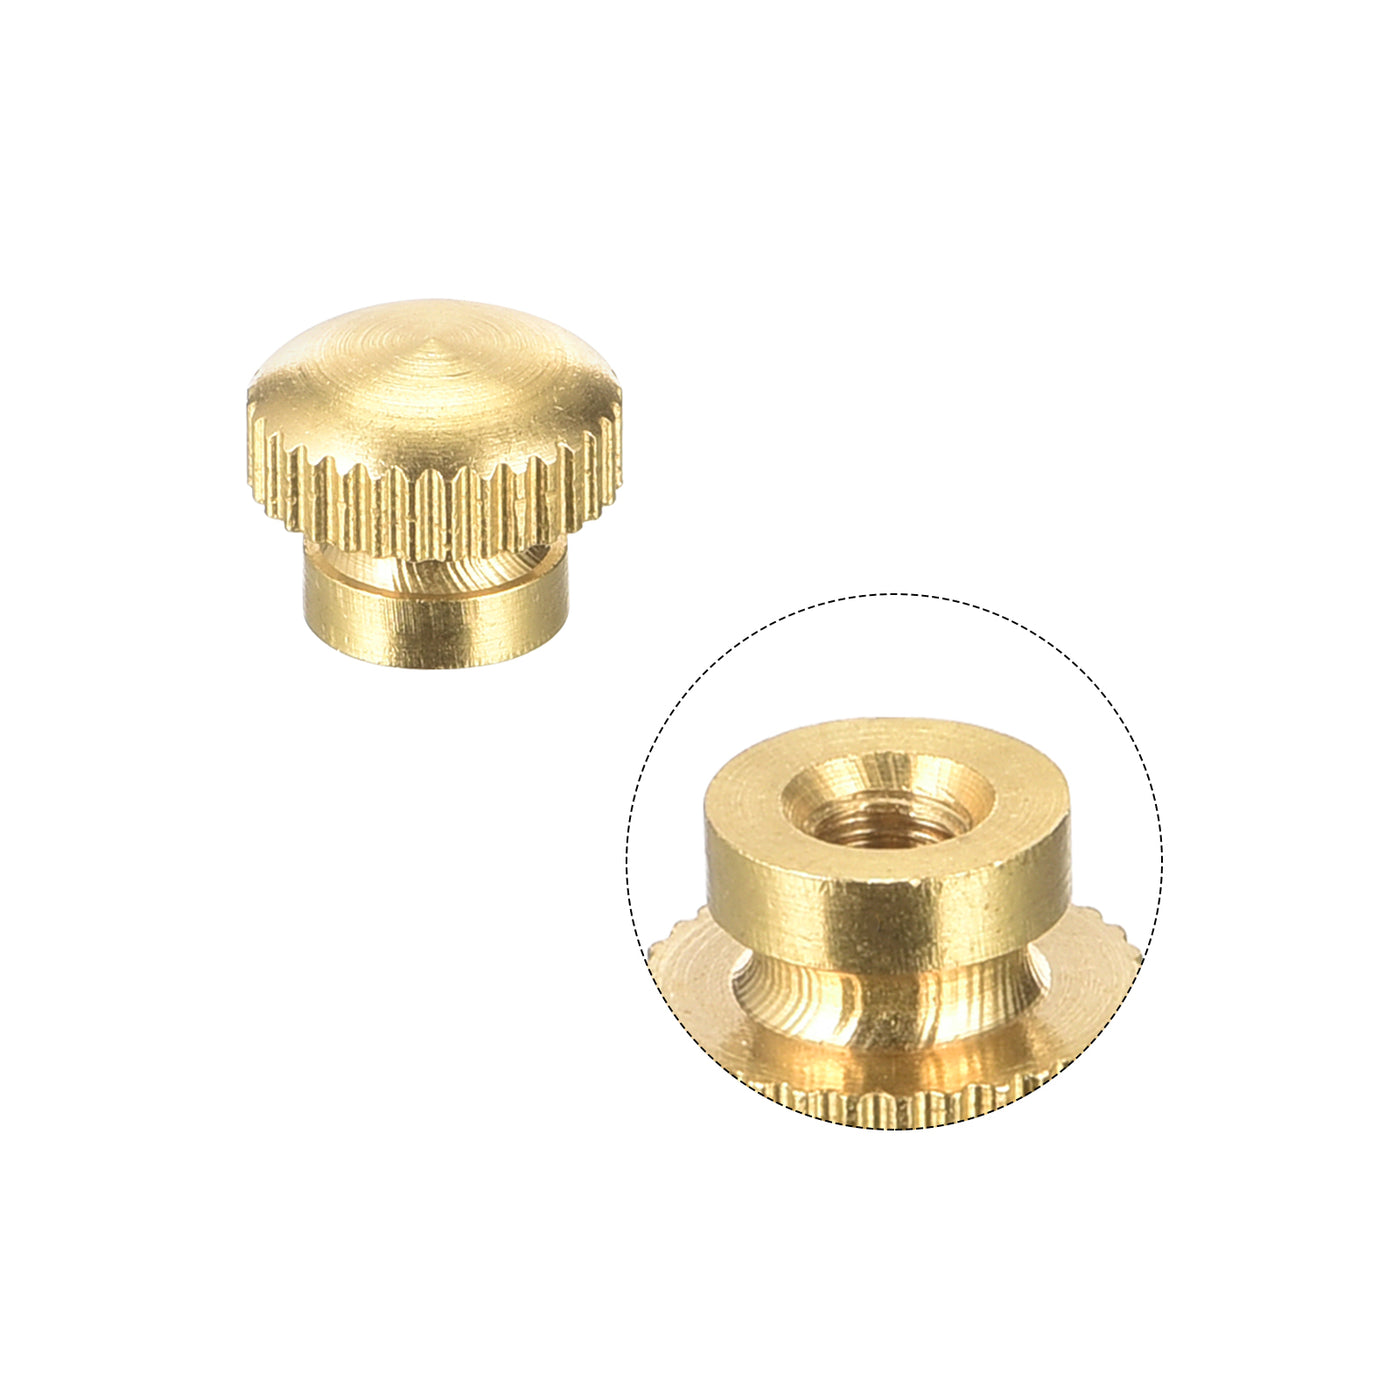 uxcell Uxcell Brass Knurled Thumb Nuts, M3x0.5mm Round Stepped Knobs Fasteners for 3D Printer, Electronic Equipment 8Pcs